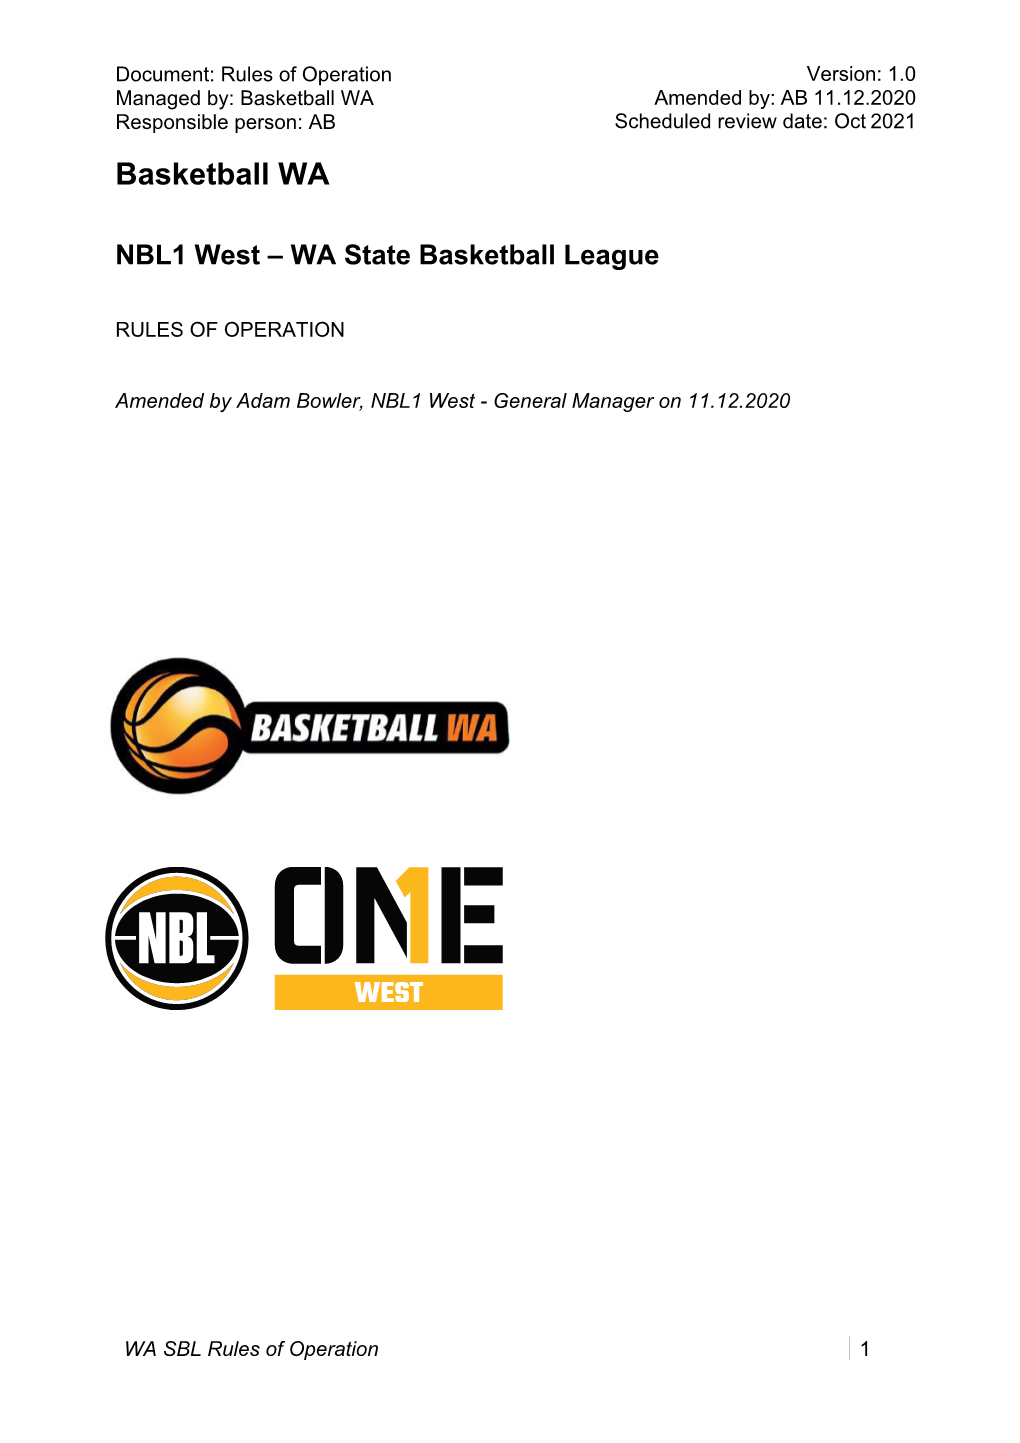 Basketball WA Amended By: AB 11.12.2020 Responsible Person: AB Scheduled Review Date: Oct 2021 Basketball WA